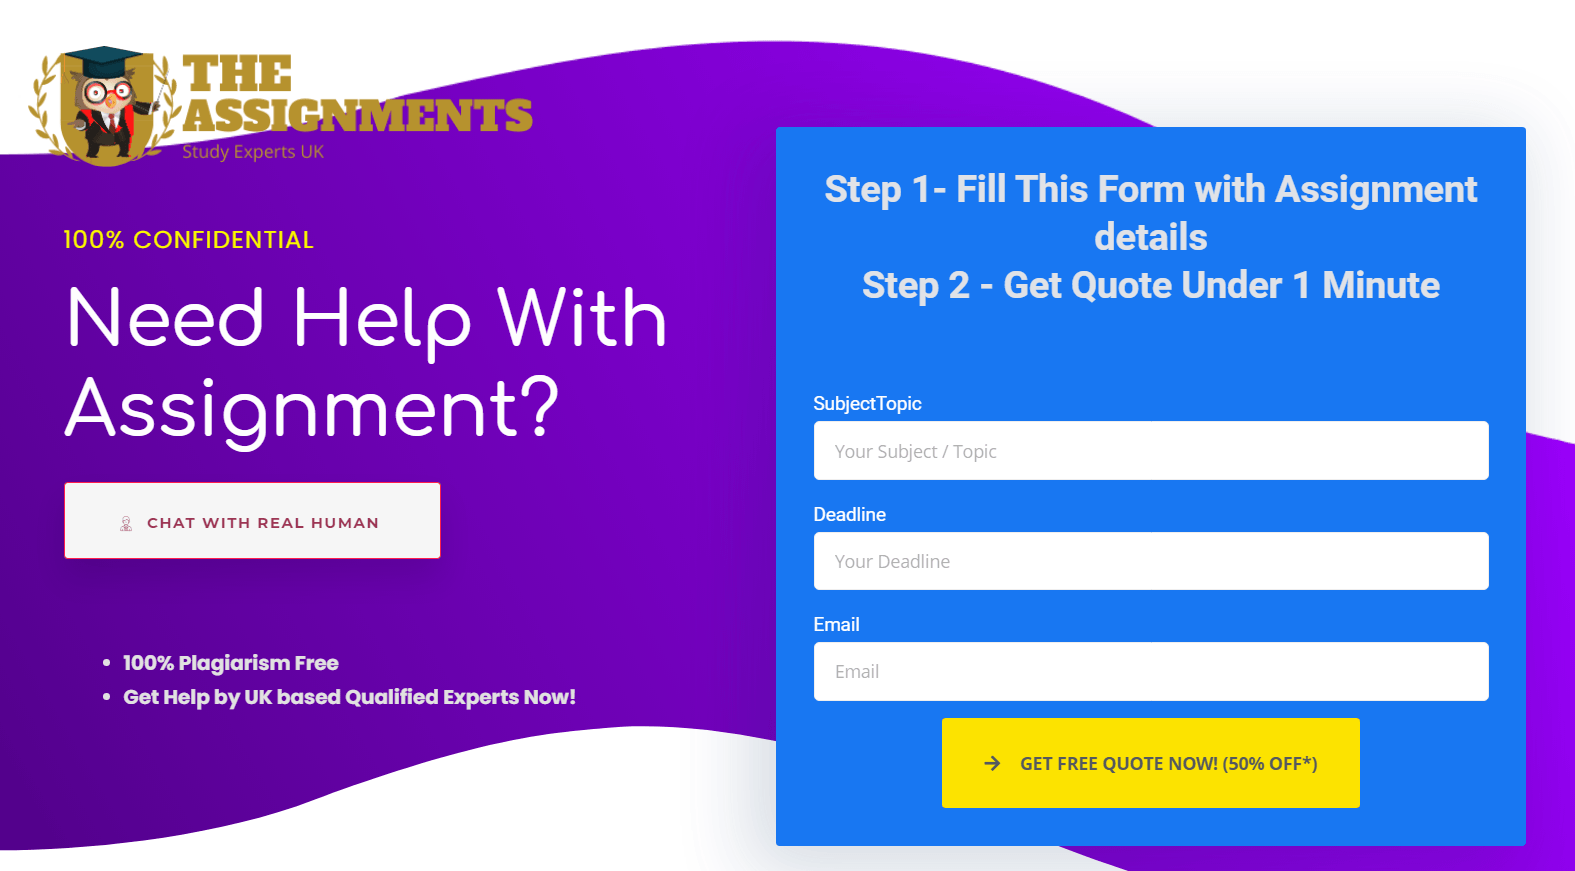 theassignments.co.uk